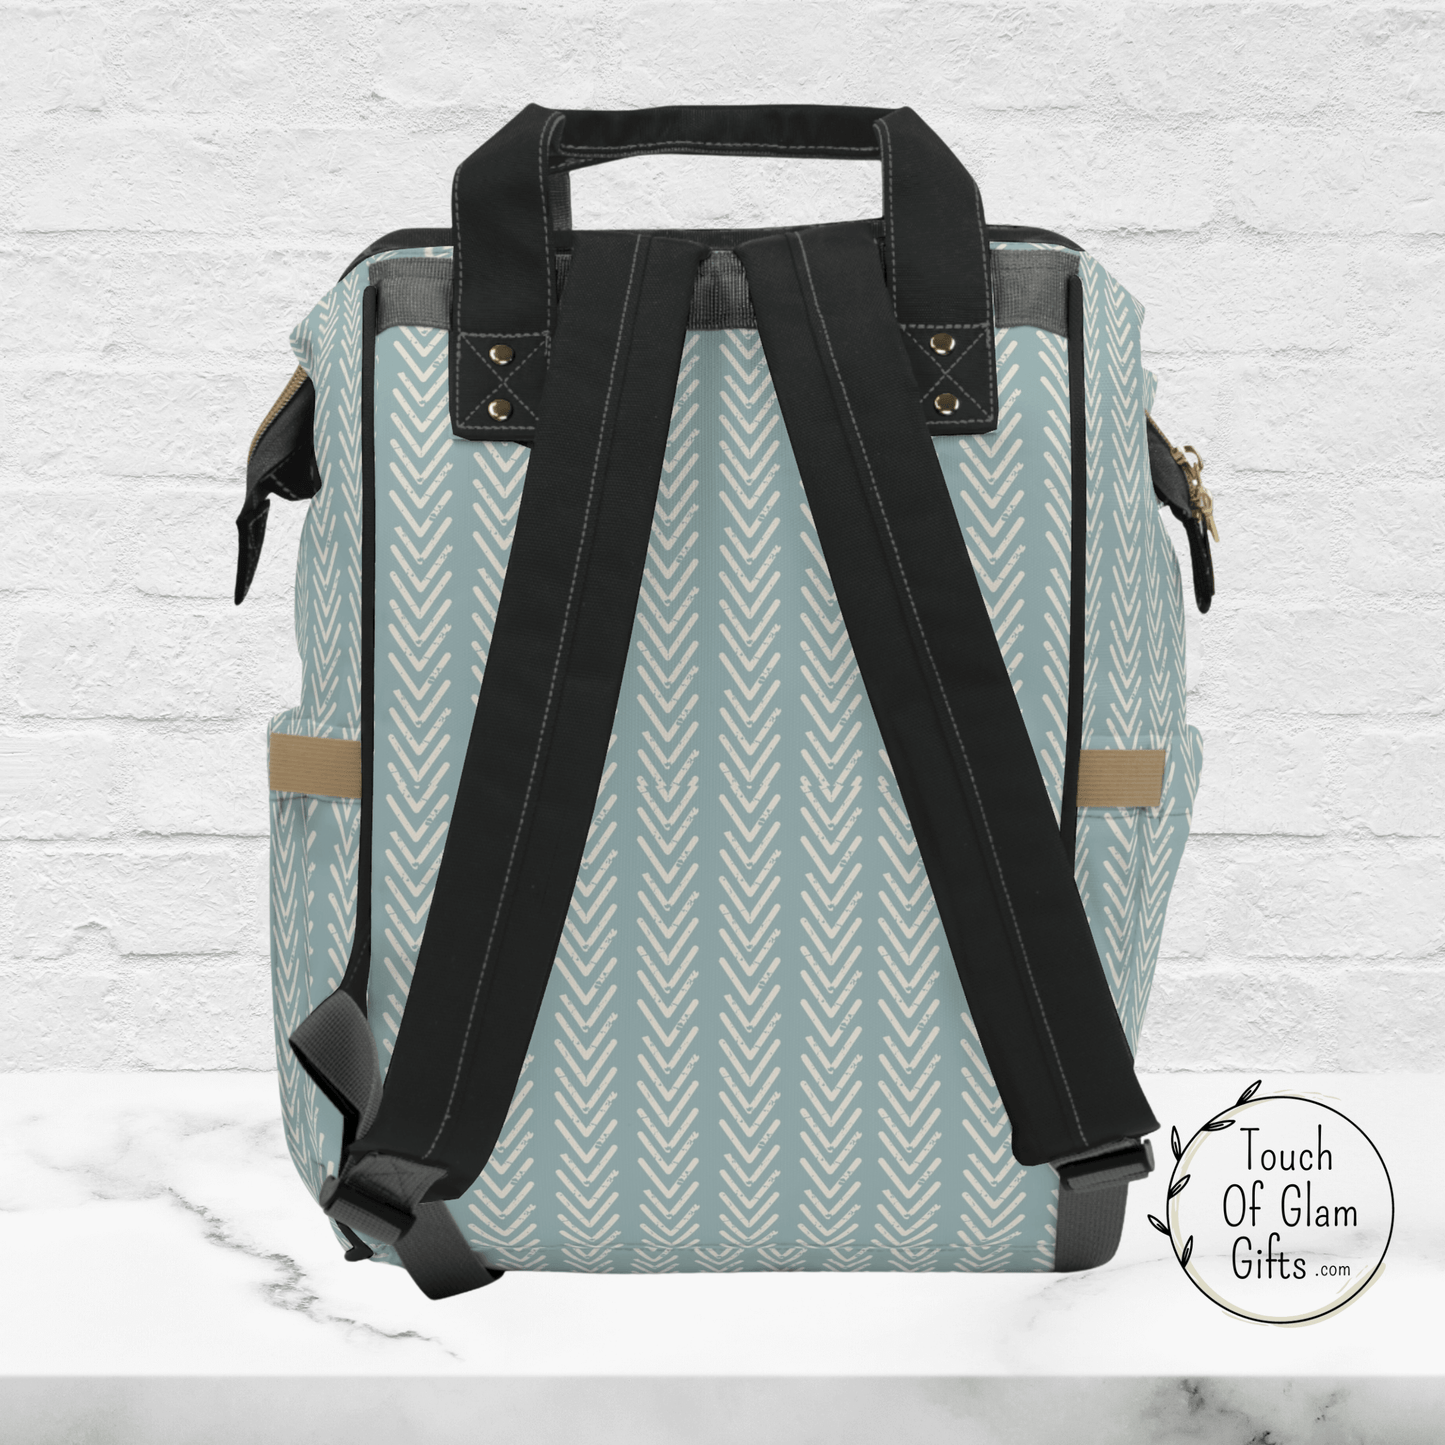 The back side of our boho sage green diaper baby bag shows the boho print all over and black adjustable straps for a comfortable backpack.